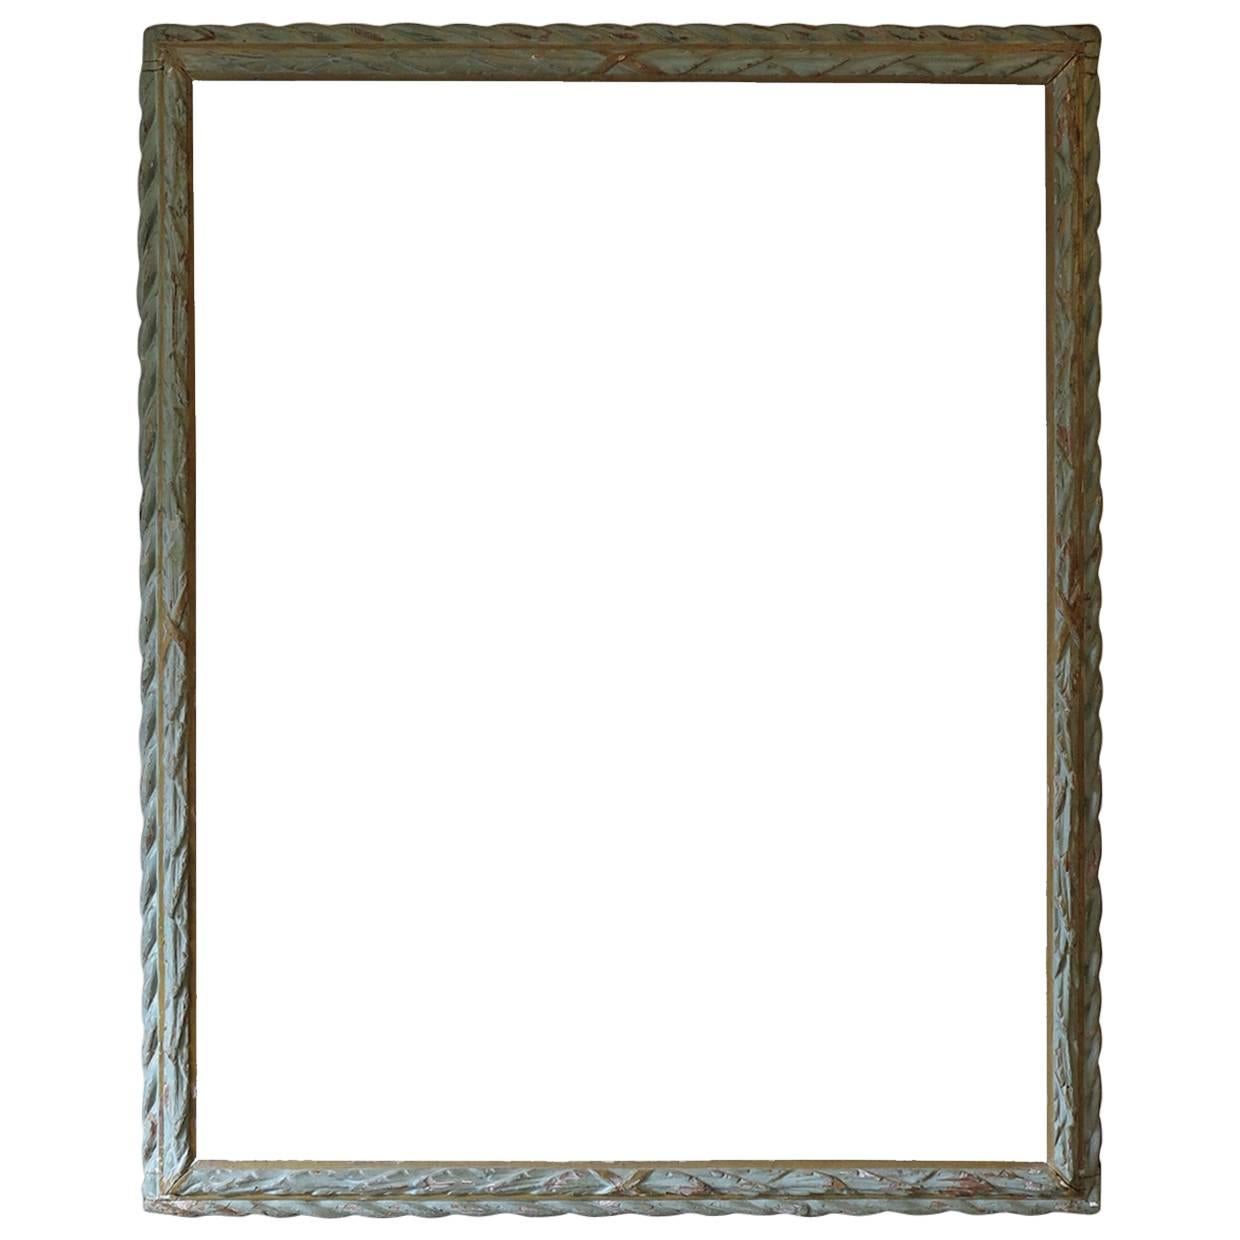 Large Laurel Wreath Carved Frame, Italy, Early 19th Century For Sale